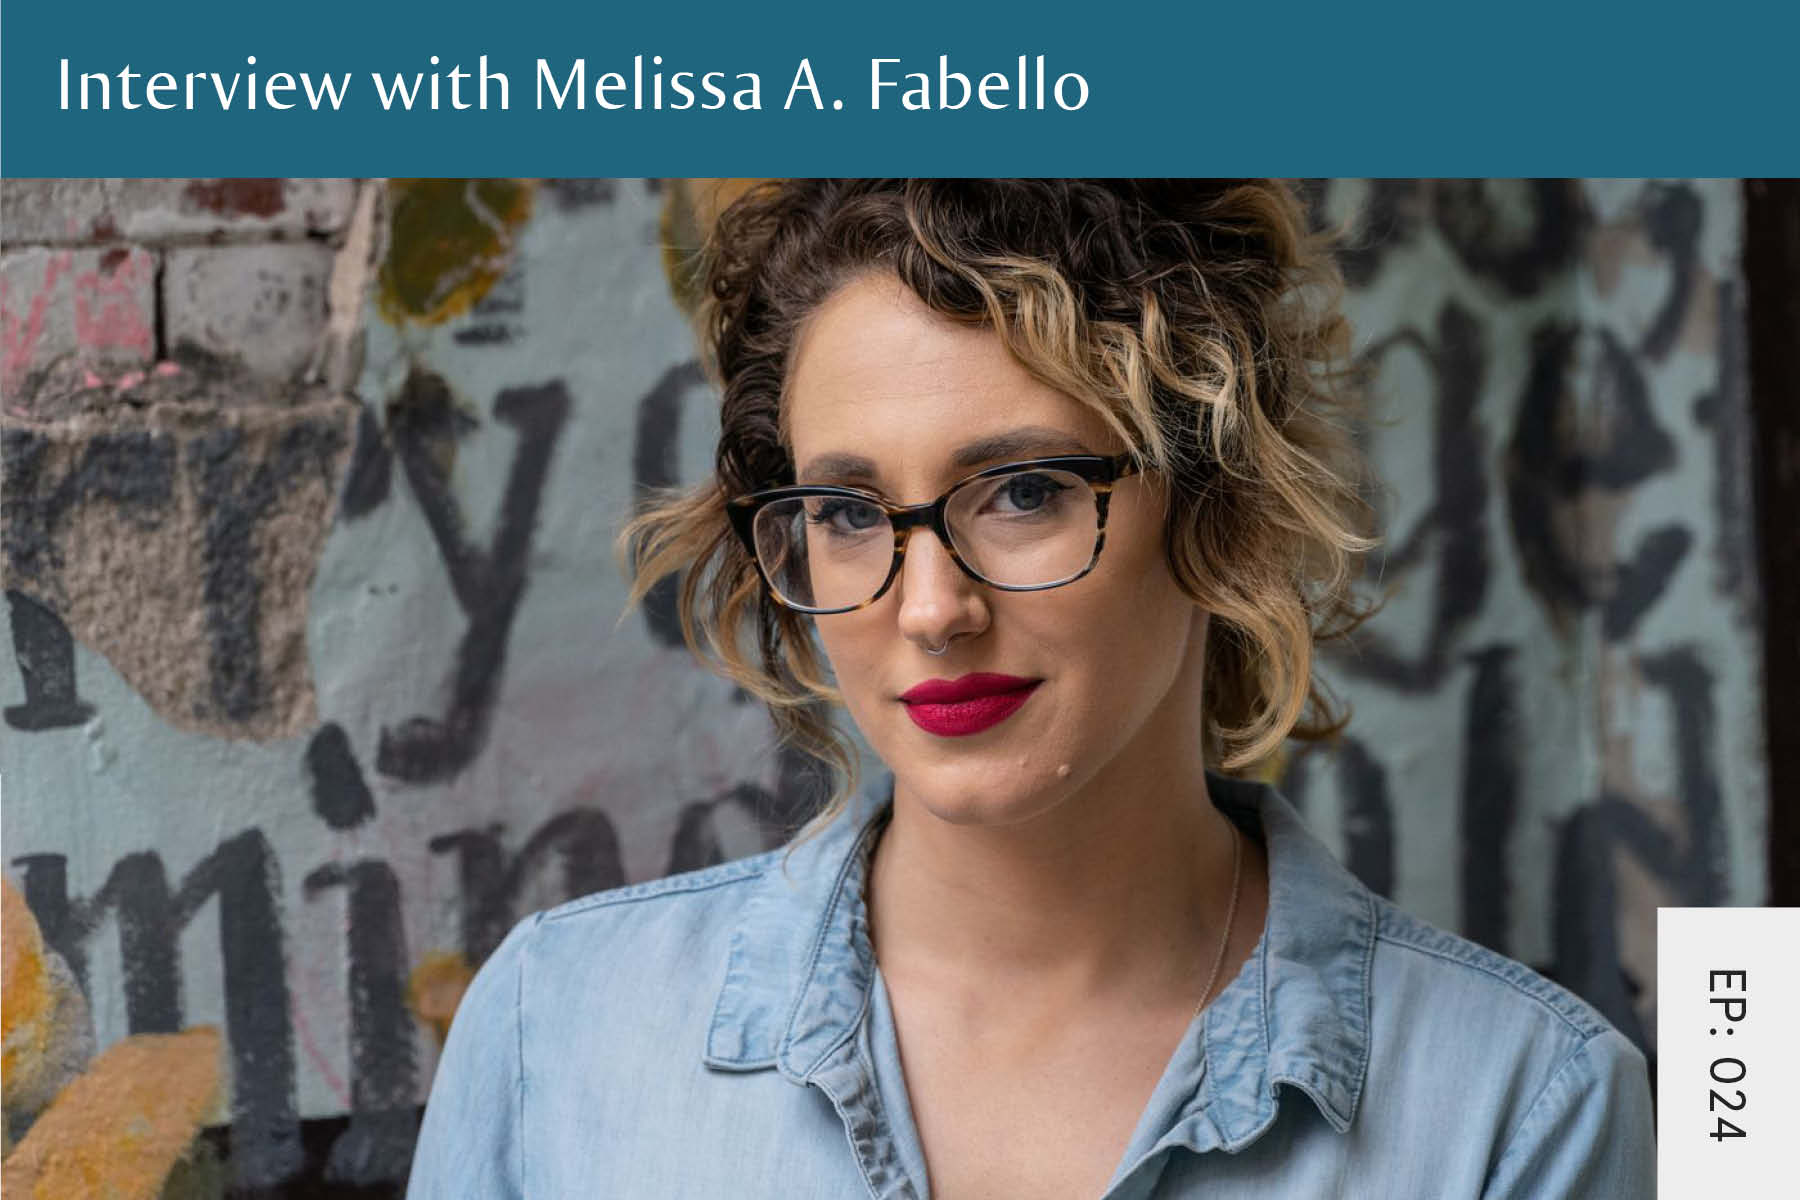 024: Interview with Melissa A. Fabello - Seven Health: Eating Disorder Recovery and Anti Diet Nutritionist